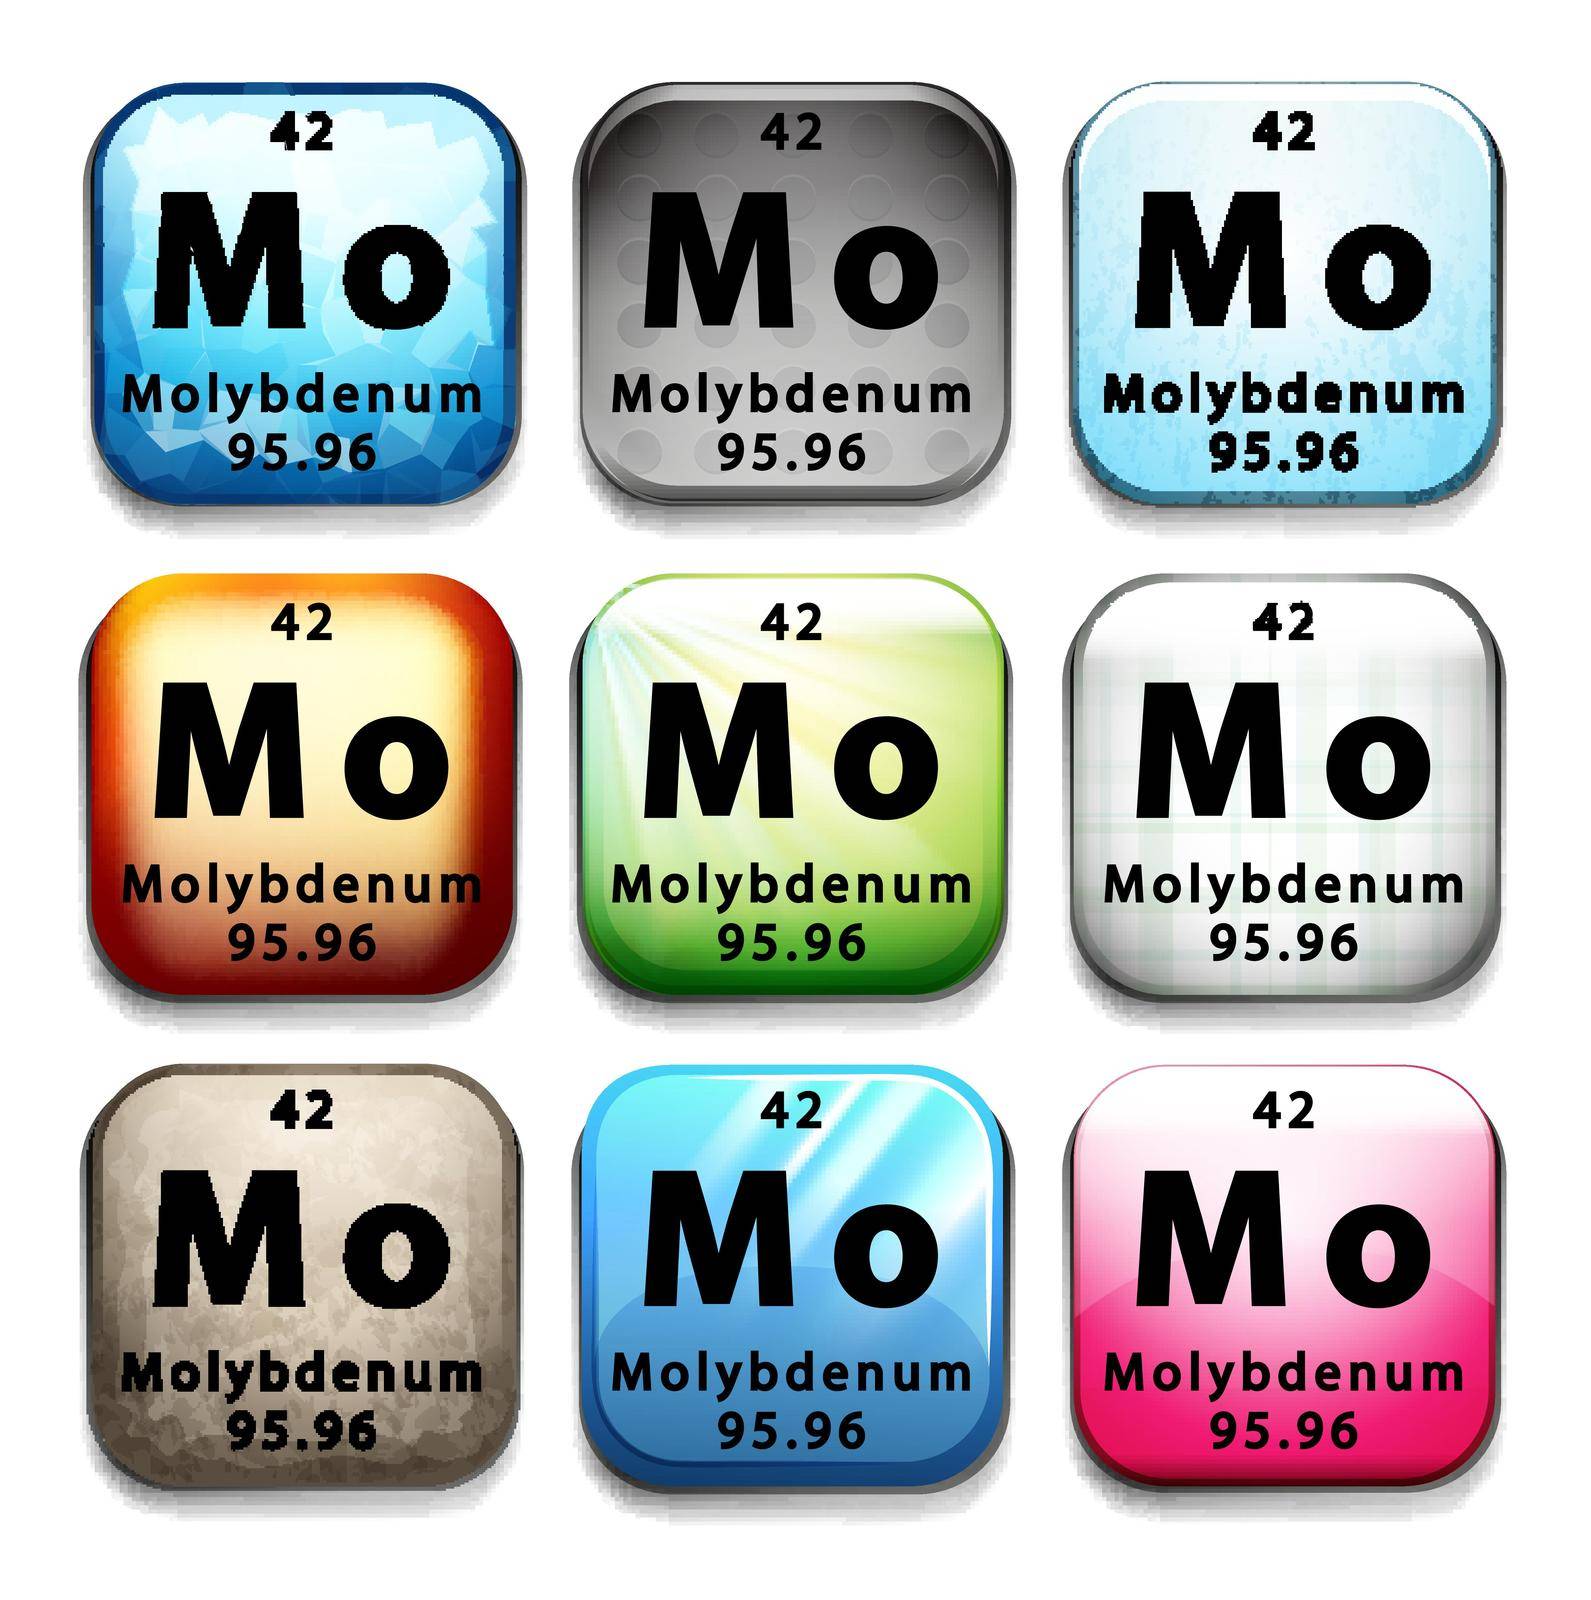 A periodic table showing Molybdenum on a white background